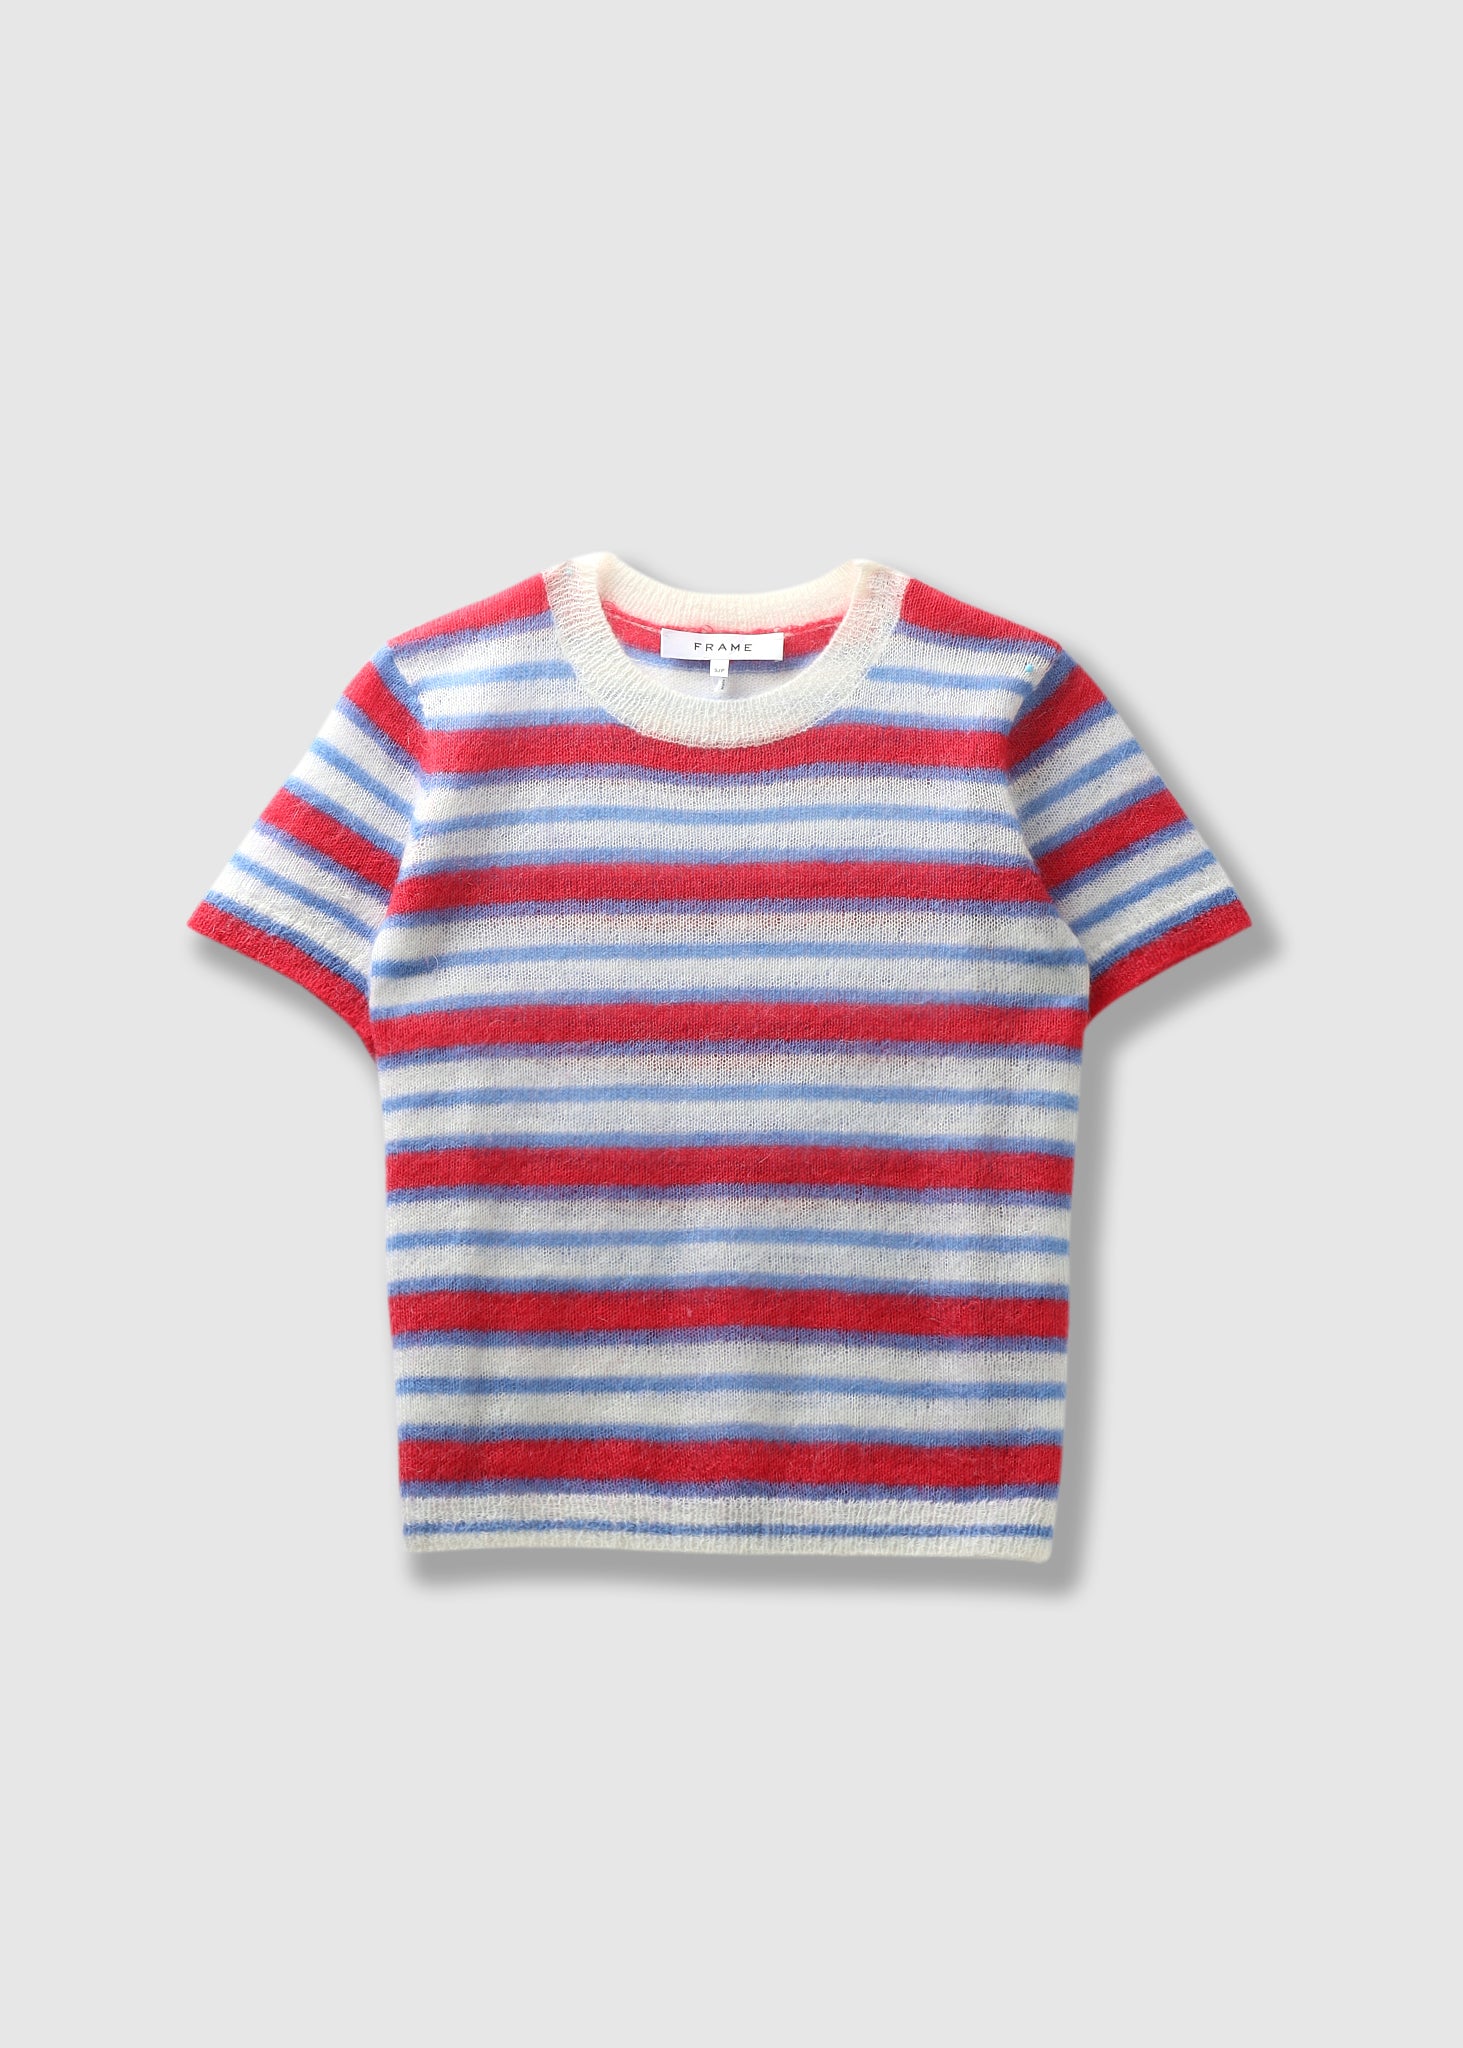 Image of Frame Womens Stripe Sweater T-Shirt In Bright Red Multi